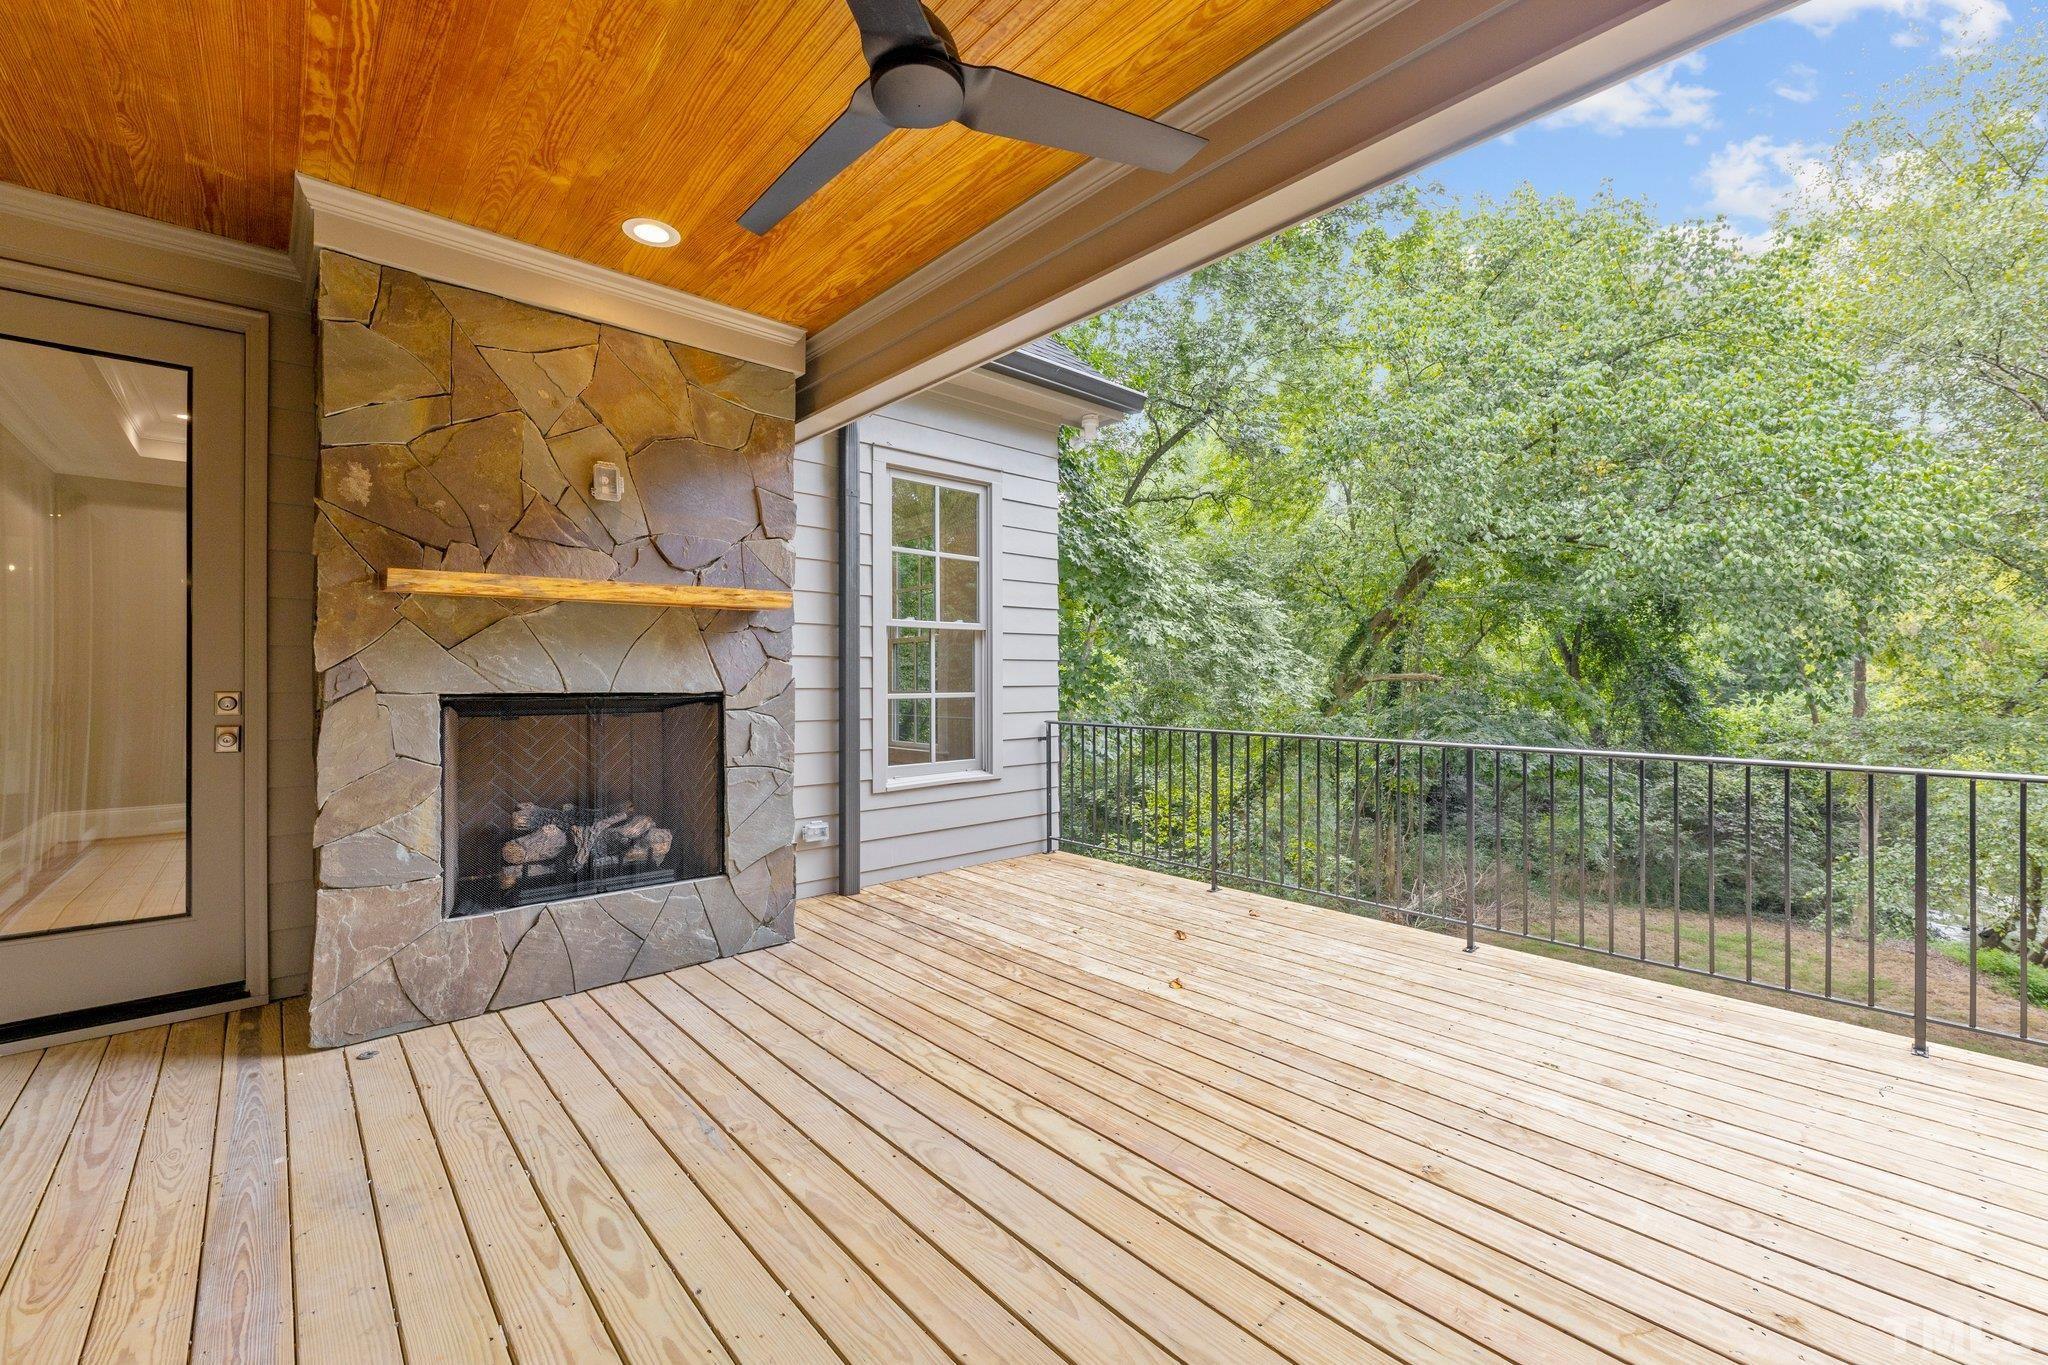 Enjoy the partially covered back porch just off the great room and master bedroom. Featuring a natural stone gas fireplace to keep you warm during the cooler Carolina seasons.